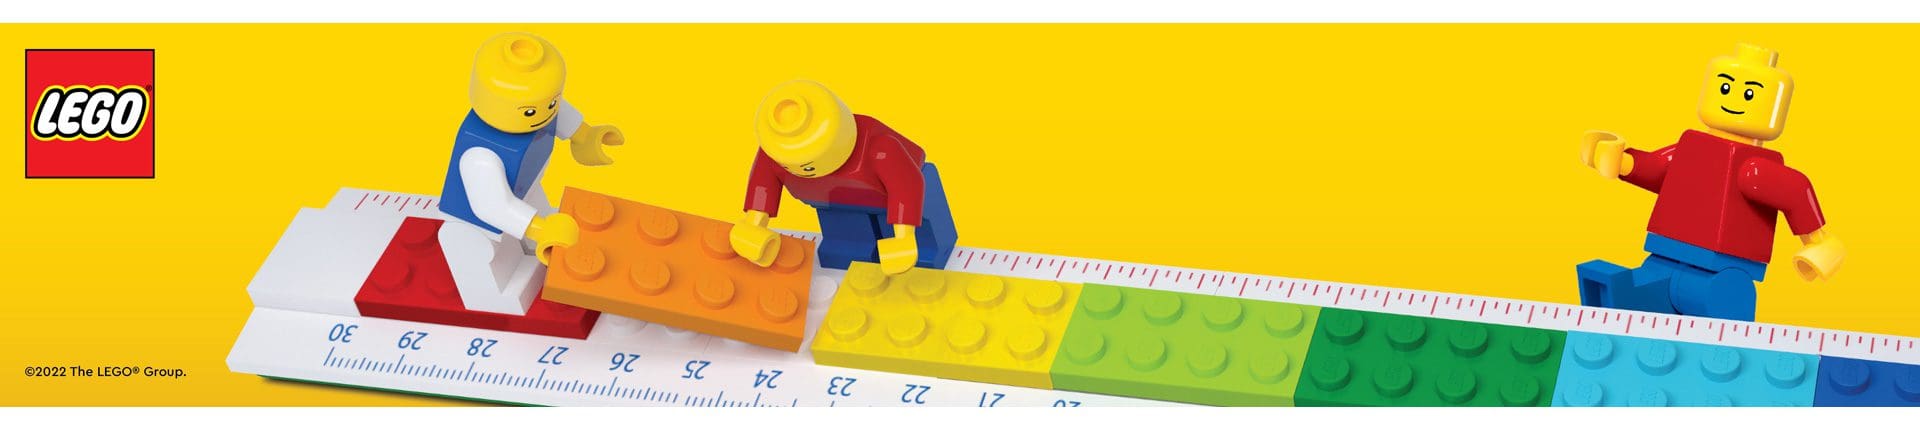 Lego-Writing-Instruments-Catagory-Header